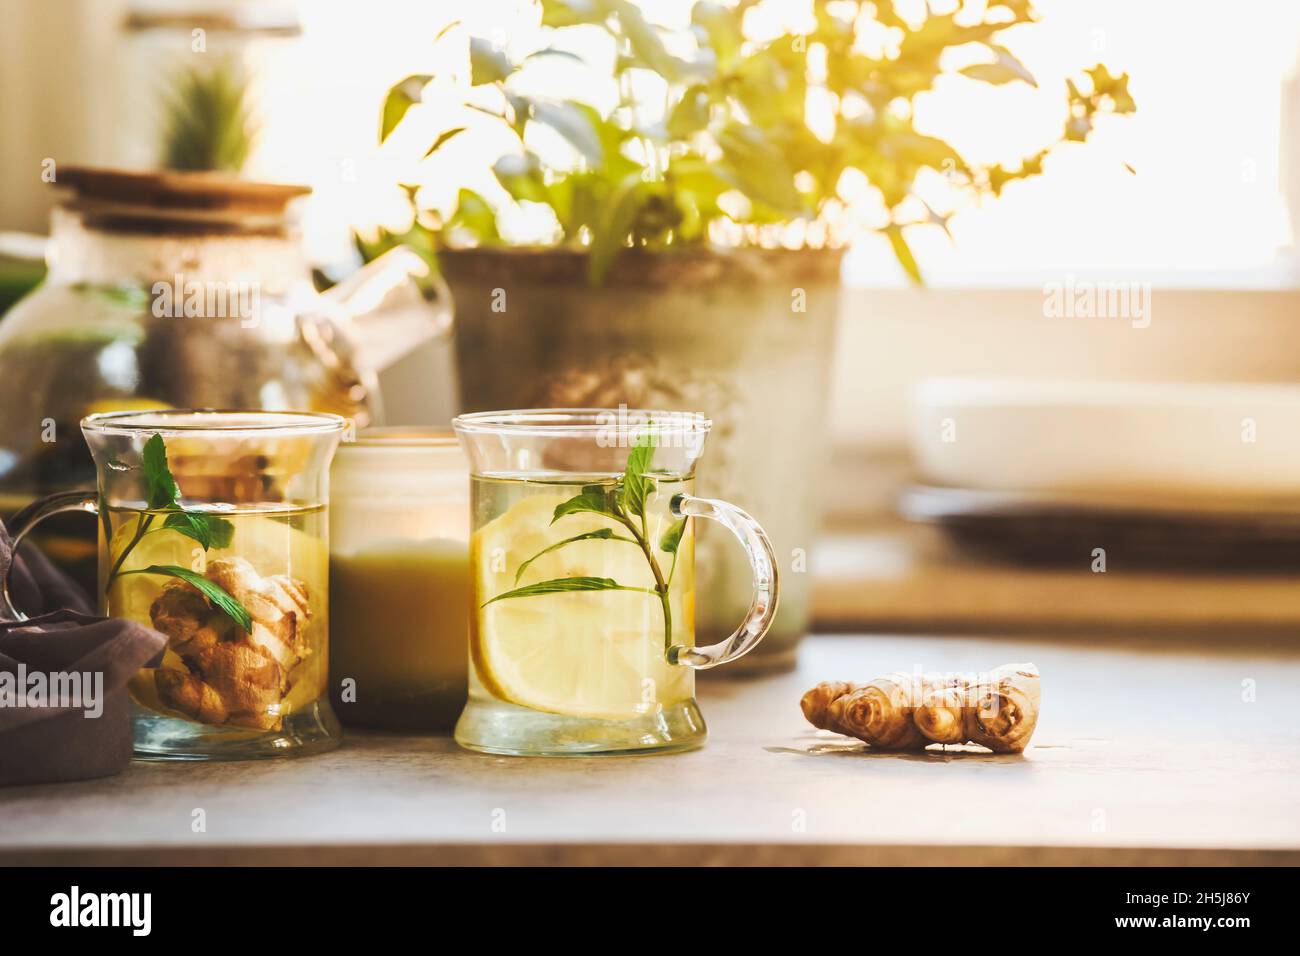 Two glass cups with fresh lemon and ginger tea on kitchen table with ginger root, herbs and kitchen utensils at window background. Healthy homemade te Stock Photo